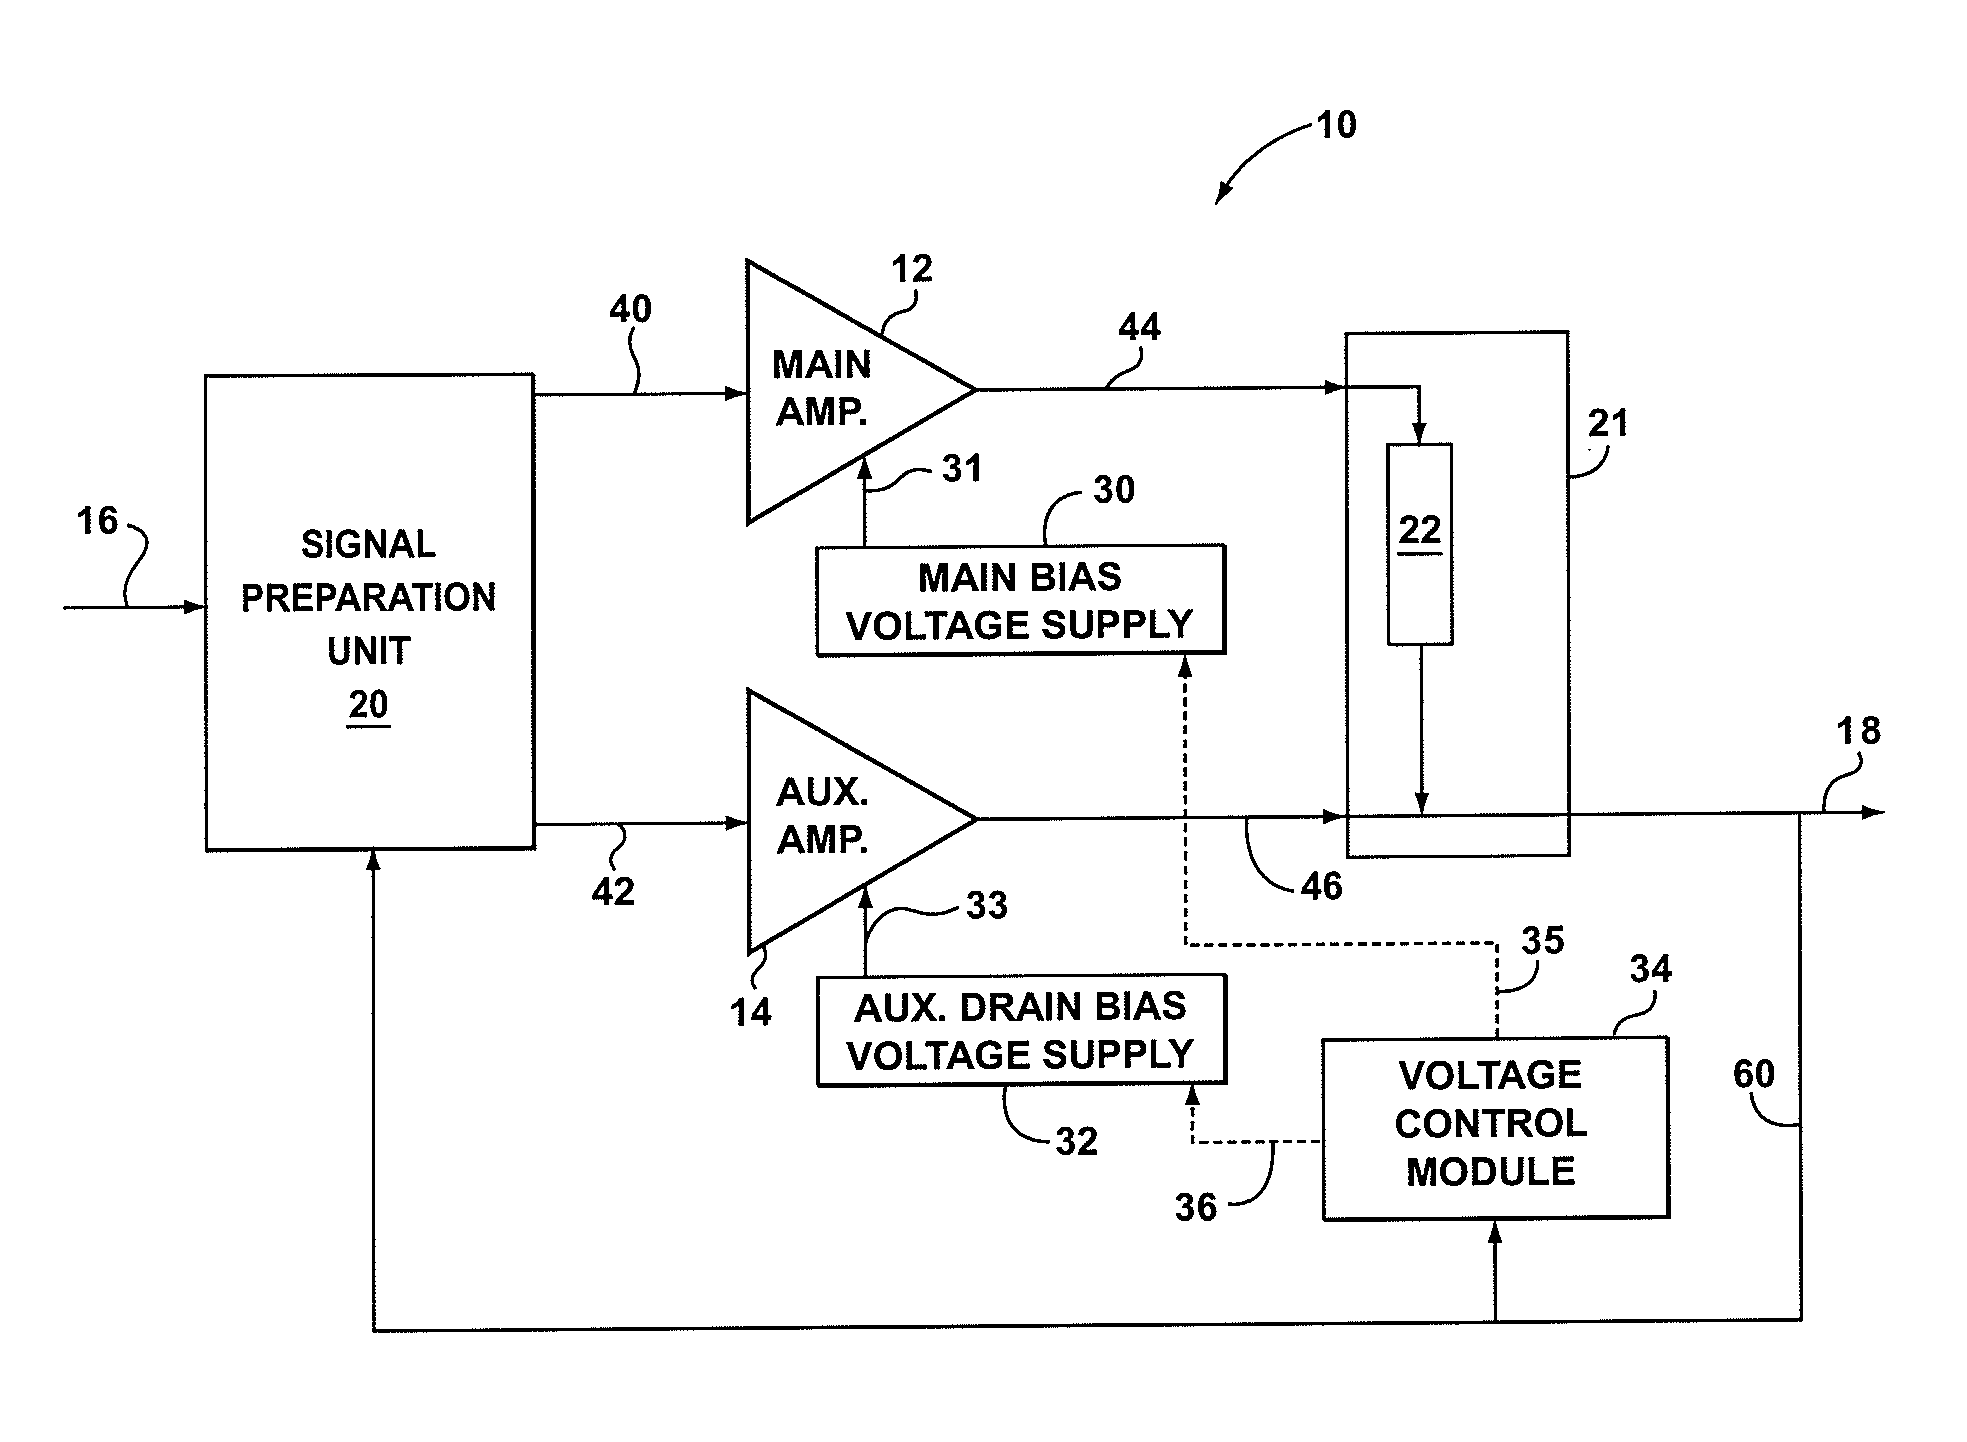 Doherty amplifier with drain bias supply modulation